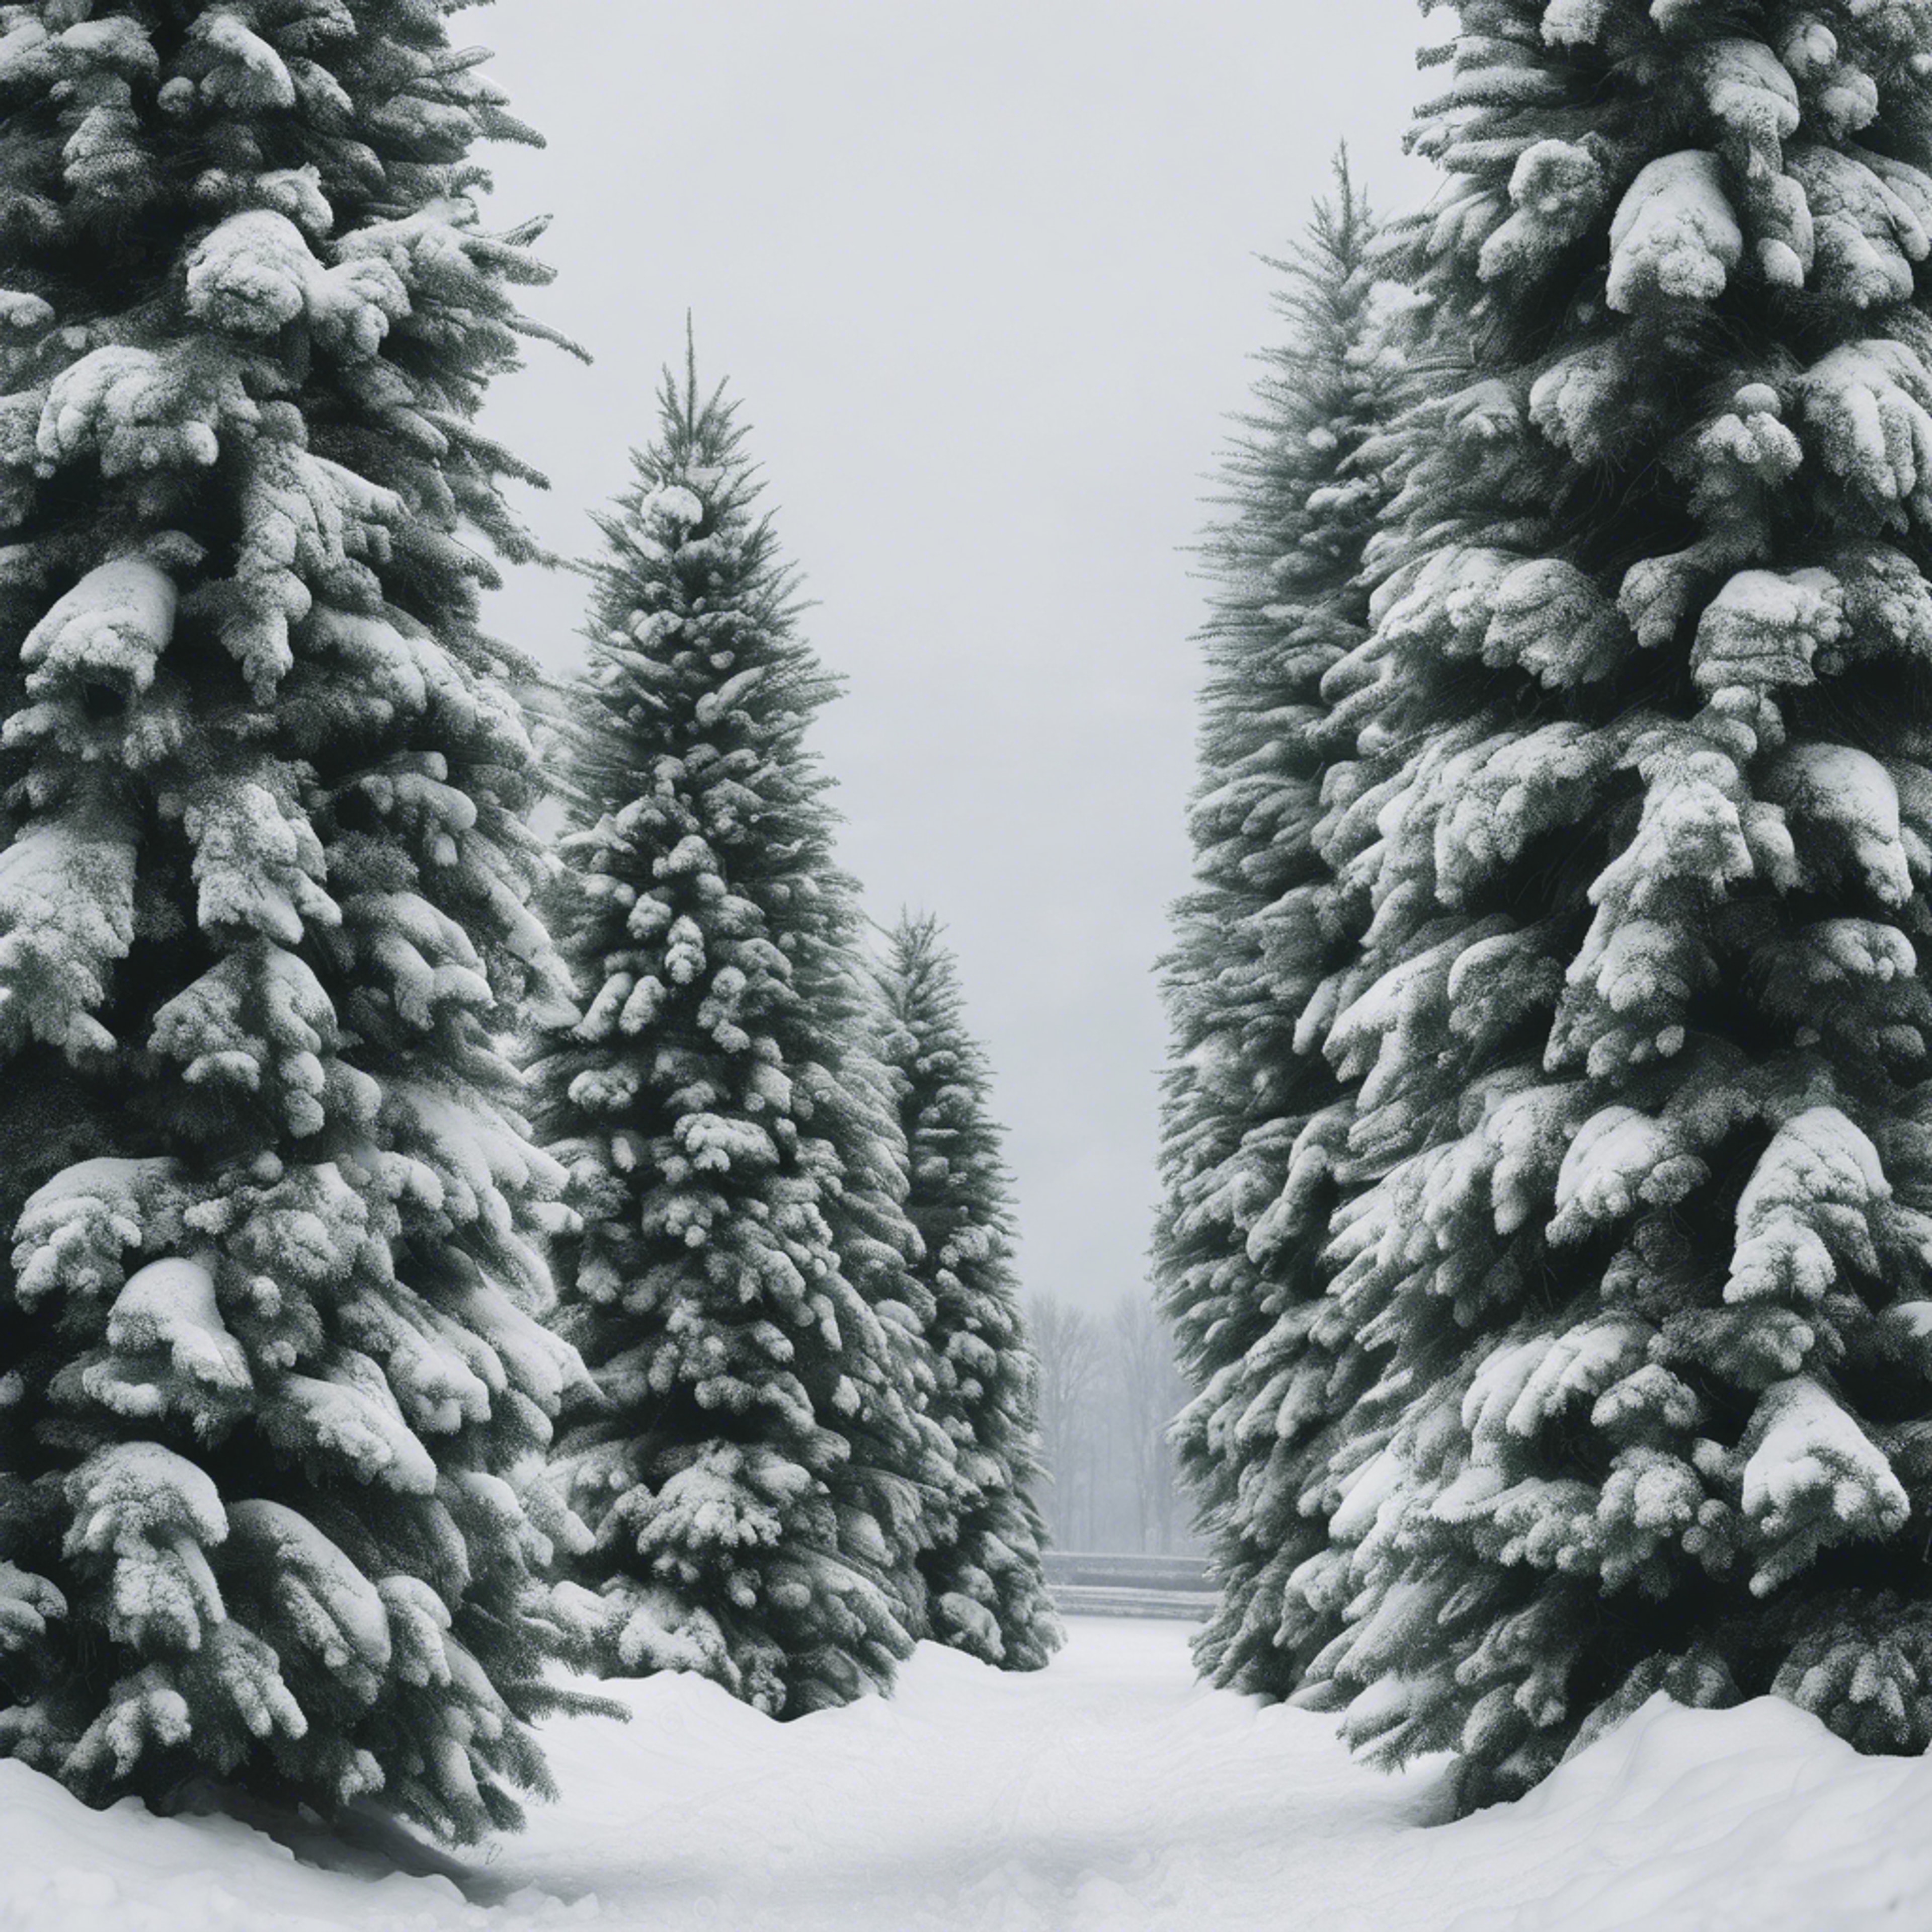 A pair of snow-covered evergreens, standing as sentinels at the entrance of a snow-laden track. Wallpaper[82b8f134477d481385e1]